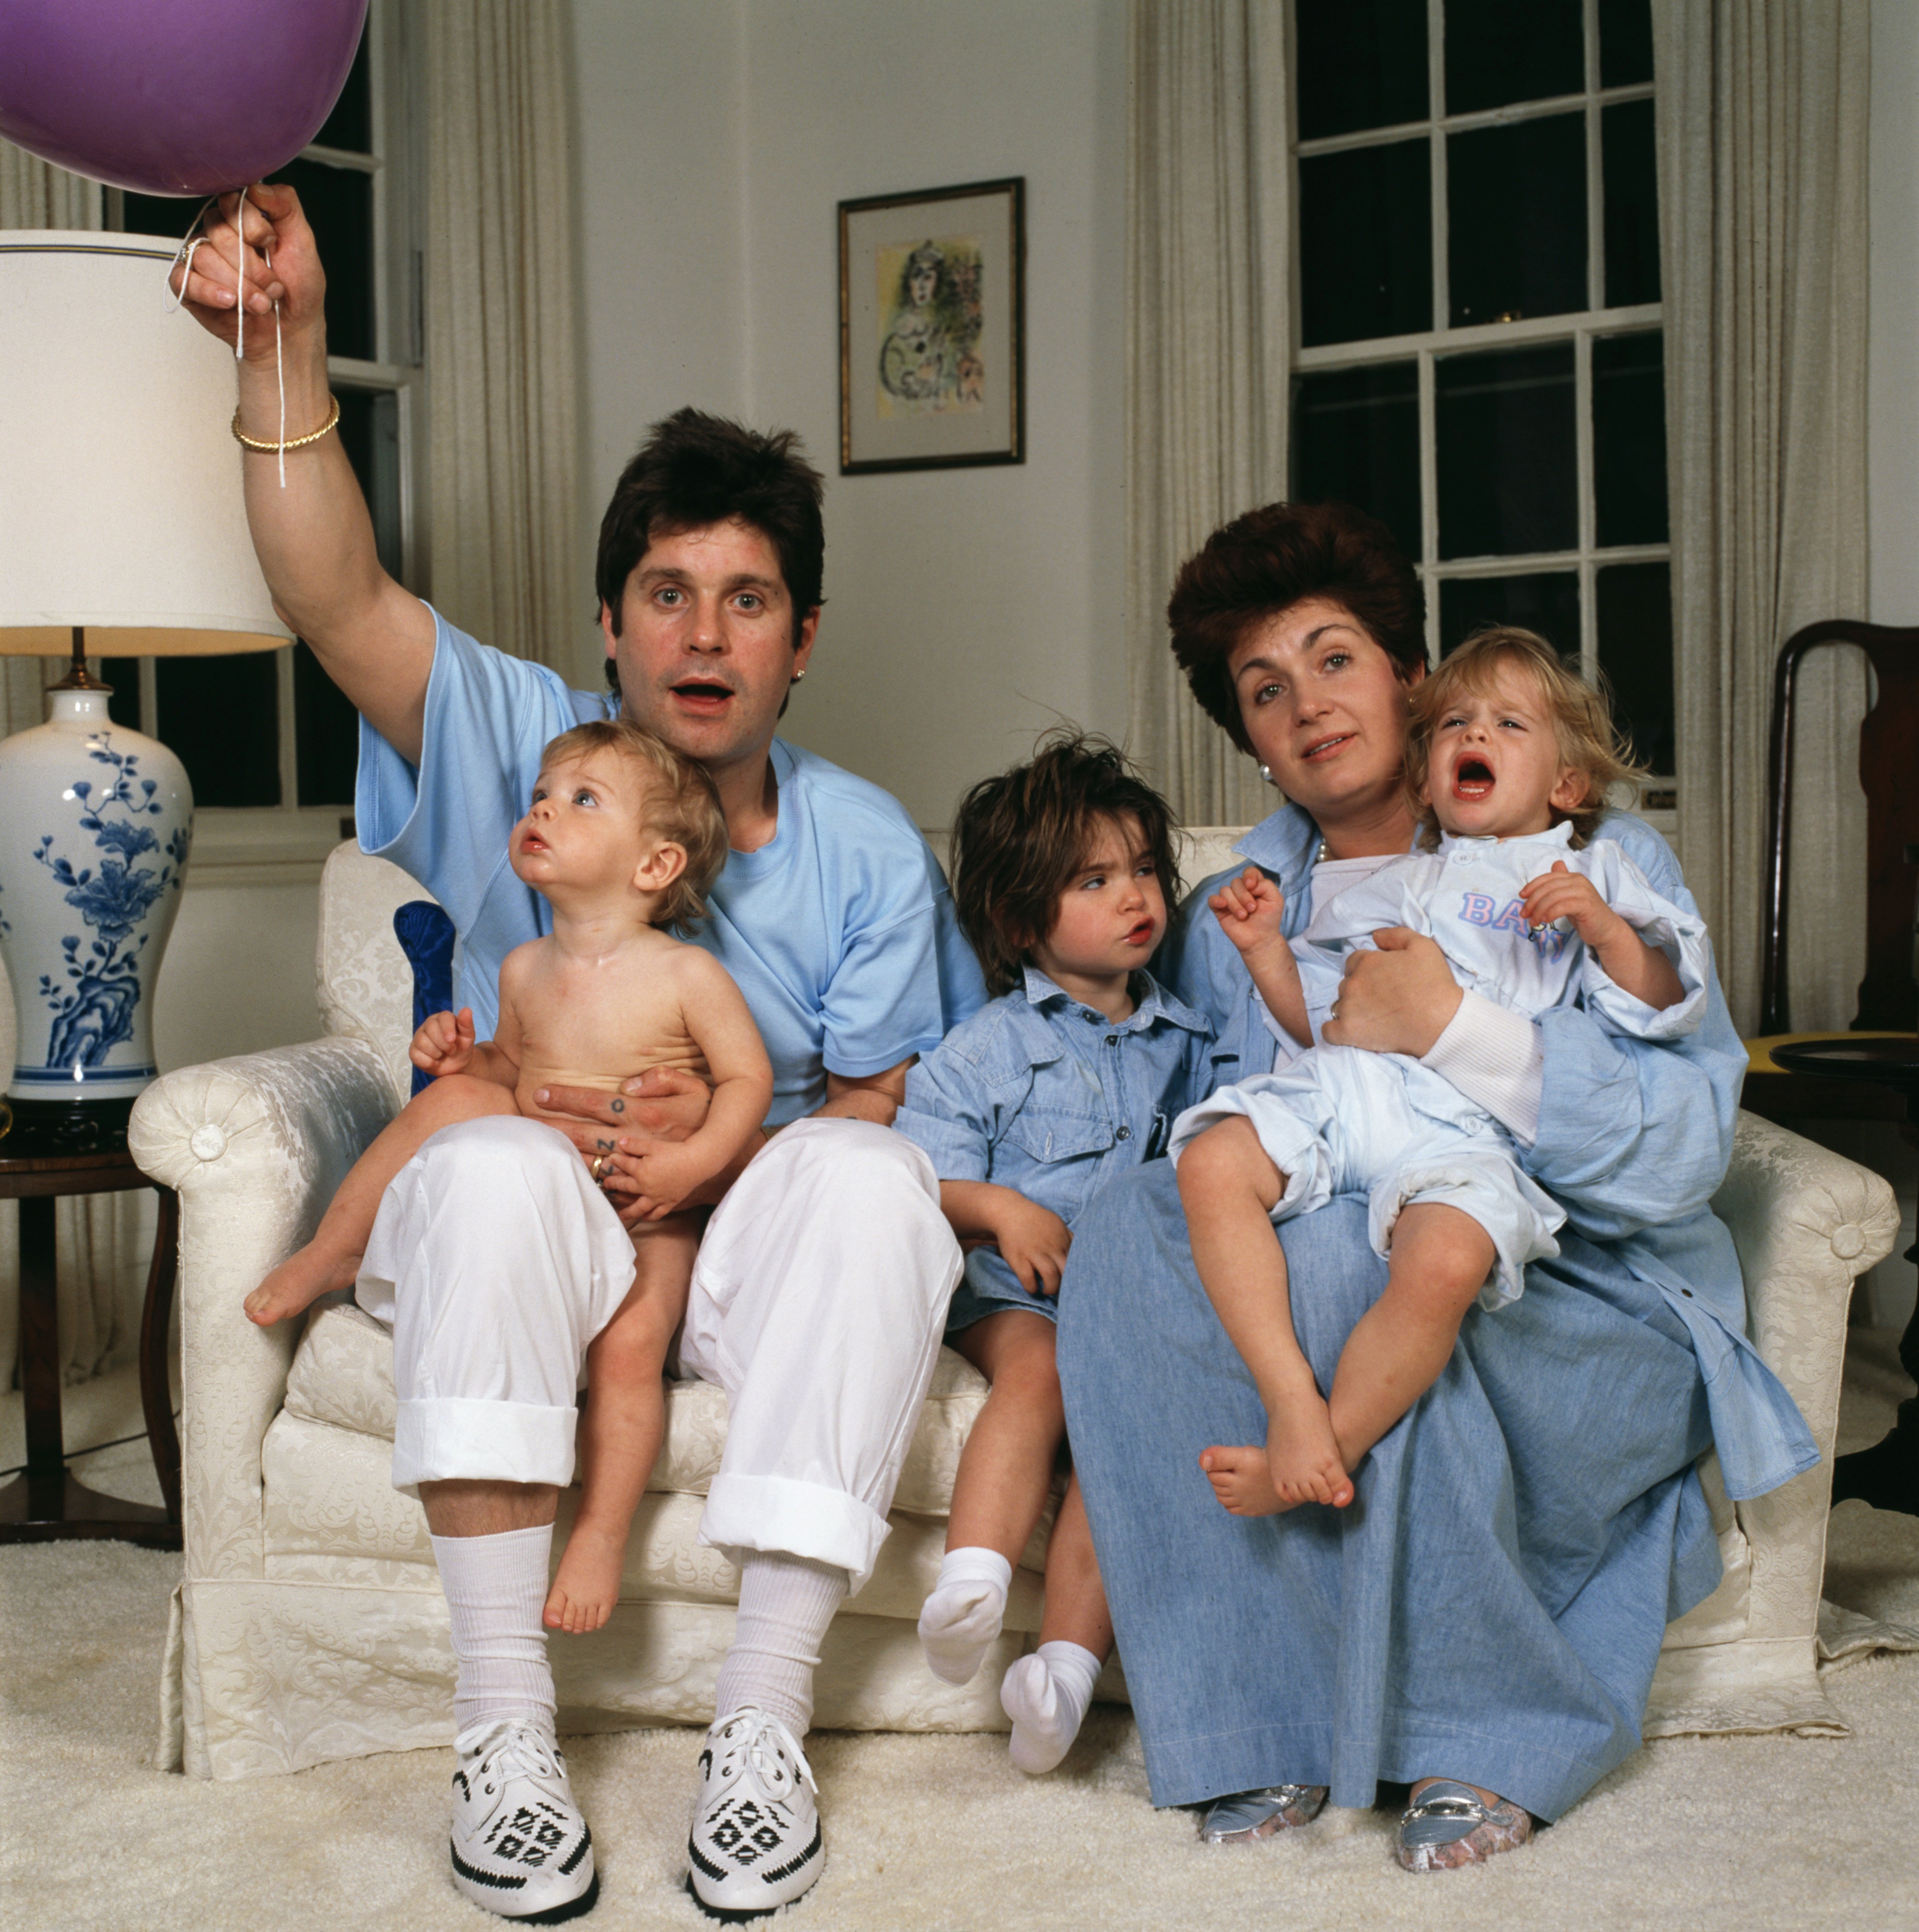 Ozzy Osbourne, Sharon Osbourne and their children Aimee, Kelly and Jack Osbourne in USA, on January 1, 1987. | Source: Getty Images